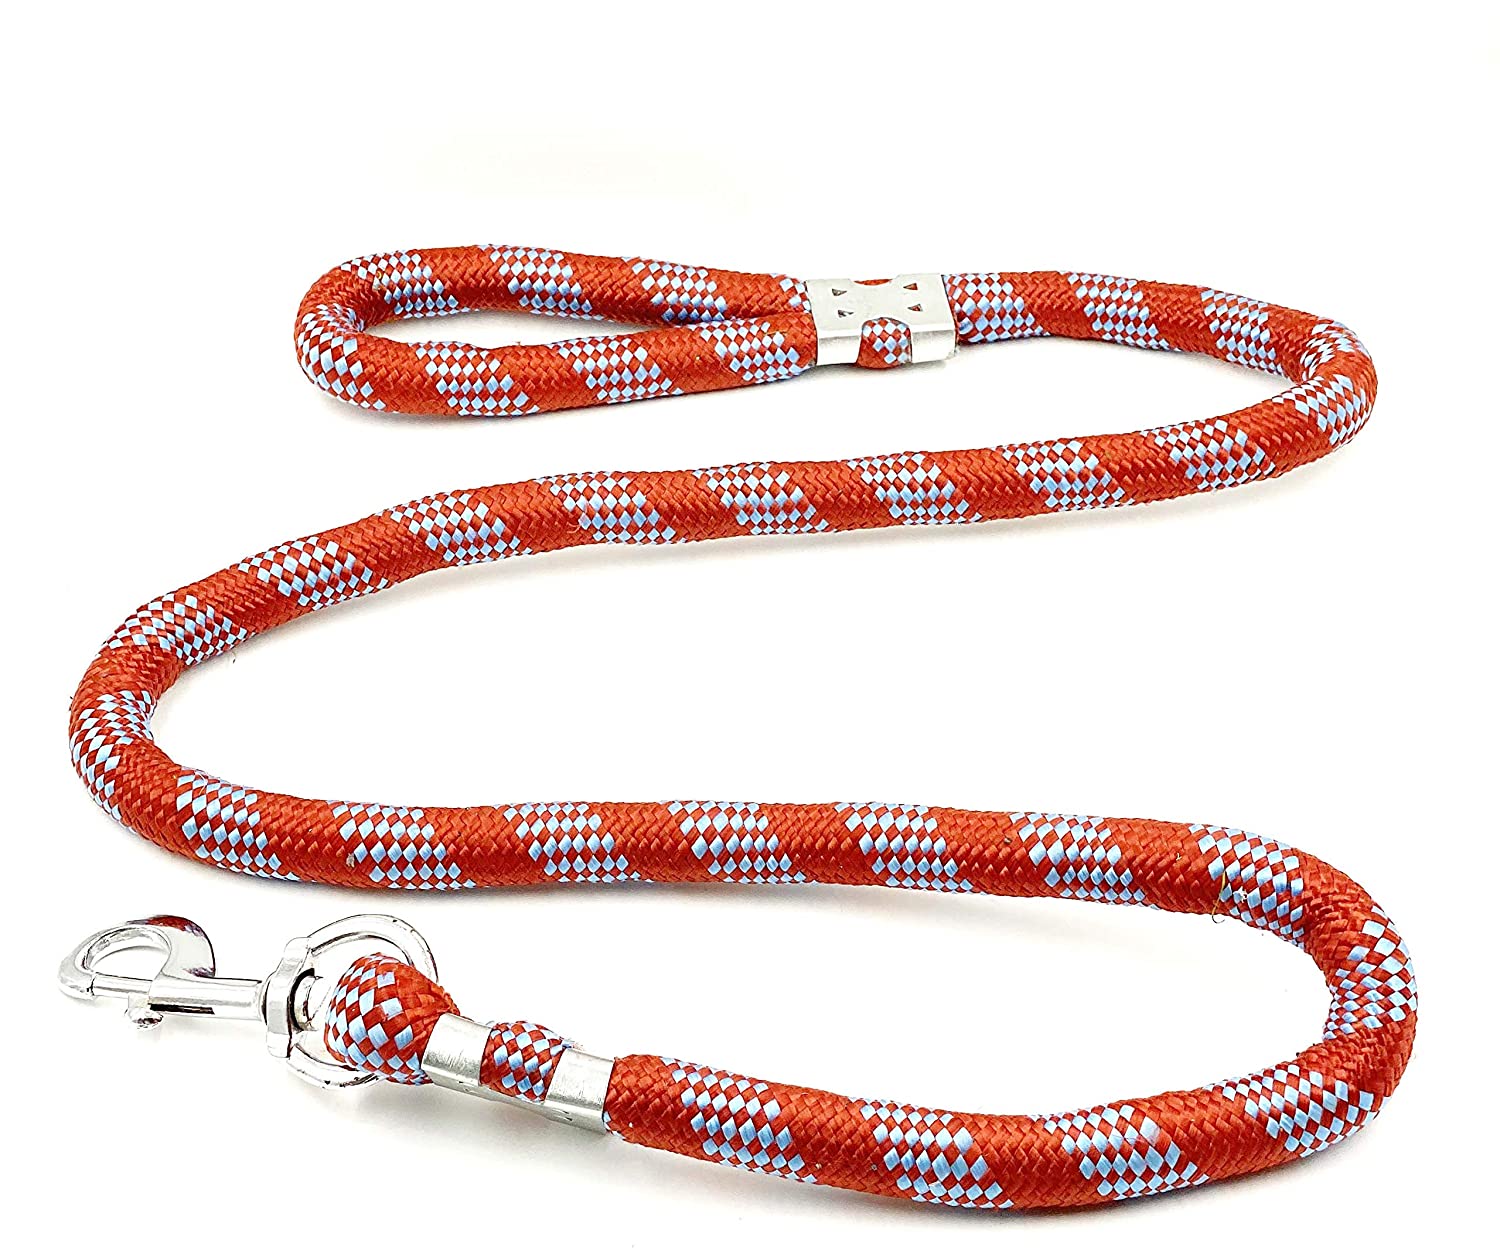 Gorilla pets Heavy Bread Dog Rope Leash red Color and Peach Color